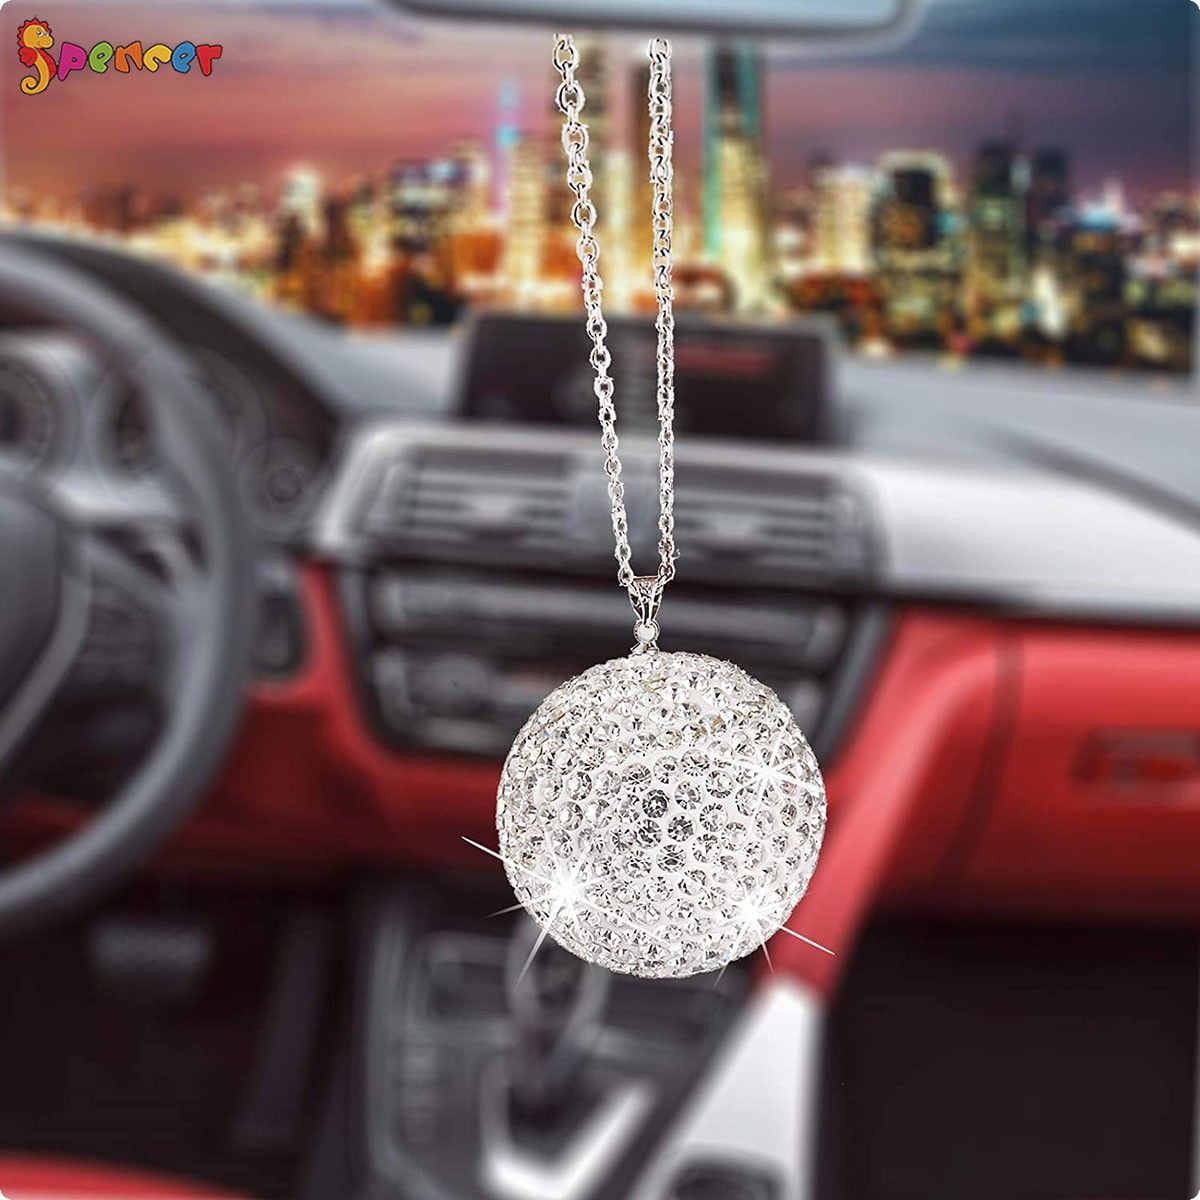 Purple Lucky Crystal Ball Car Accessories Bling Bling Car Rear View Mirror Charm Rhinestone Hanging Ornament for Car Decoration & Home Decor Crystal Sun Catcher Ornament for Women Men 